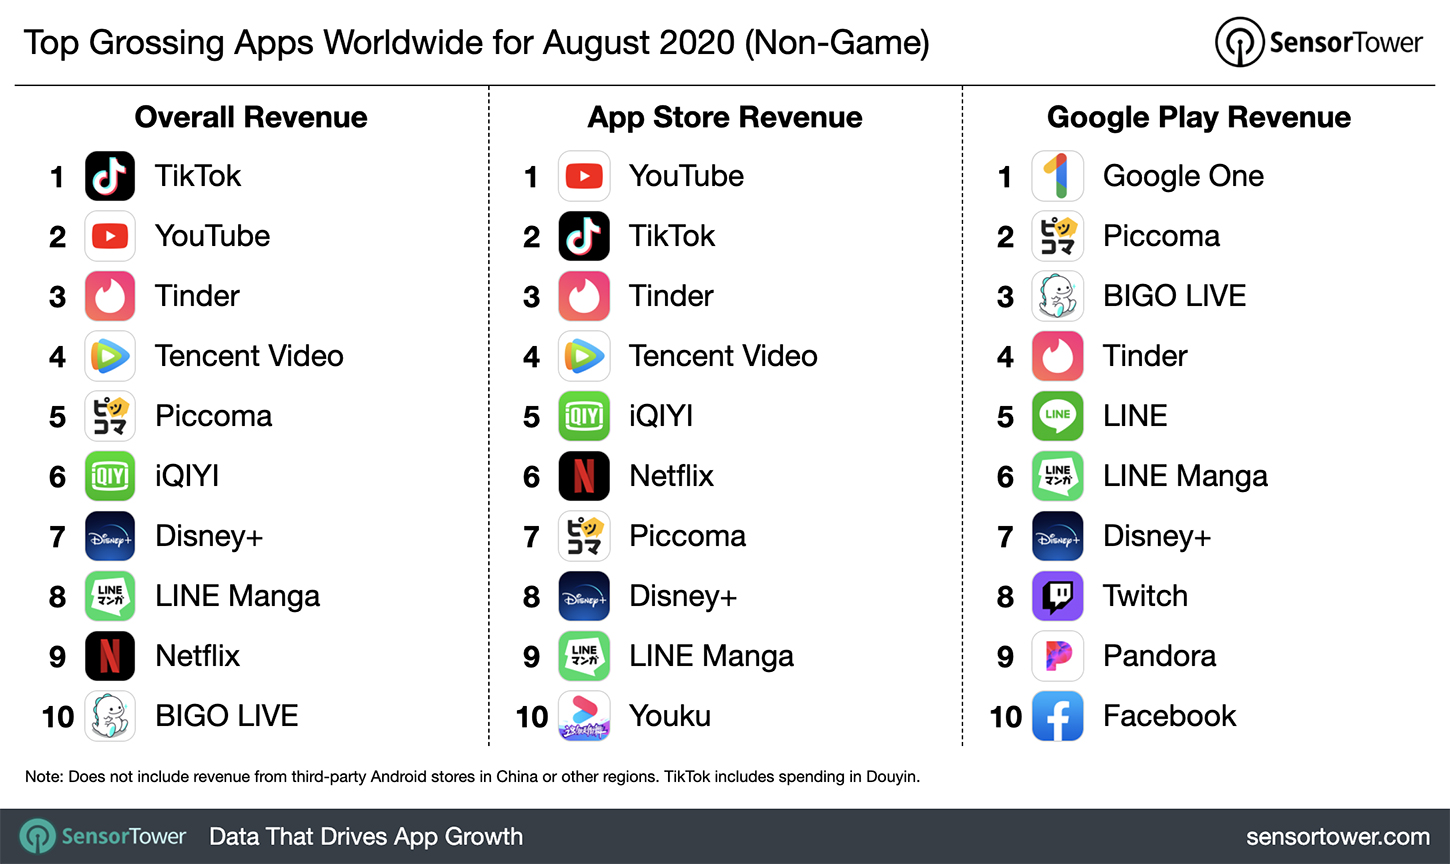 “Top Grossing Apps Worldwide for August 2020